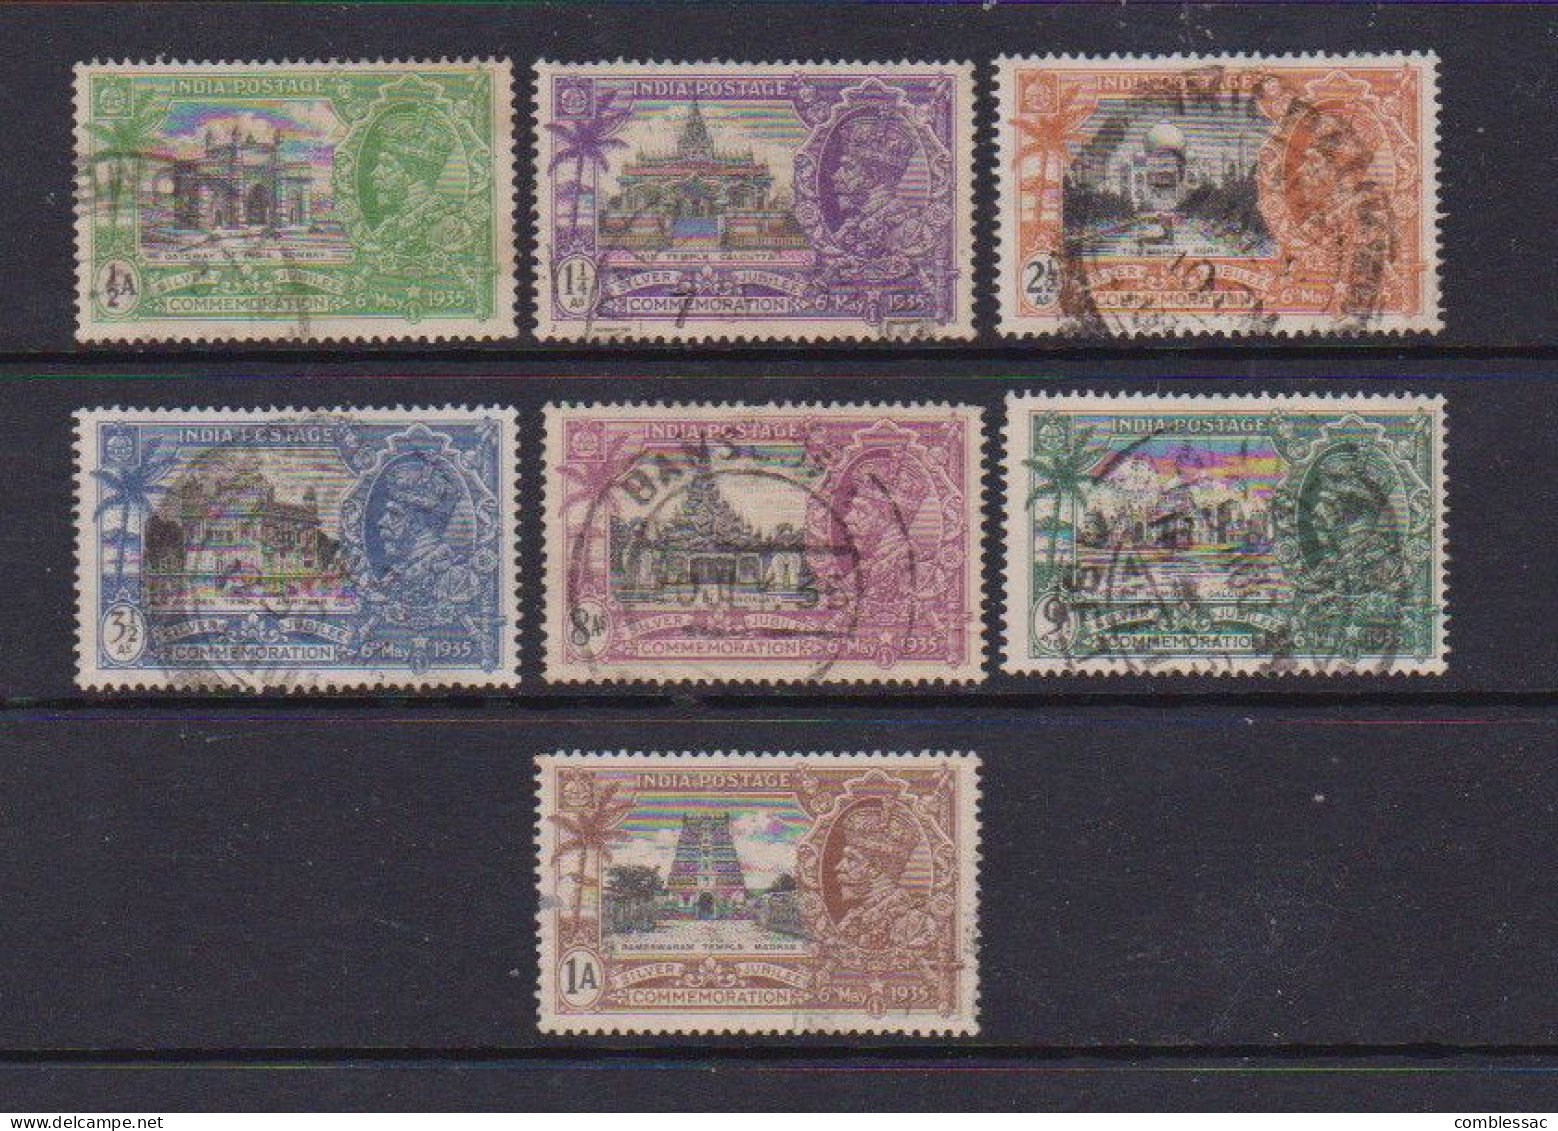 INDIA    1935    Silver  Jubilee    7 Various  Stamps    USED - 1911-35 King George V